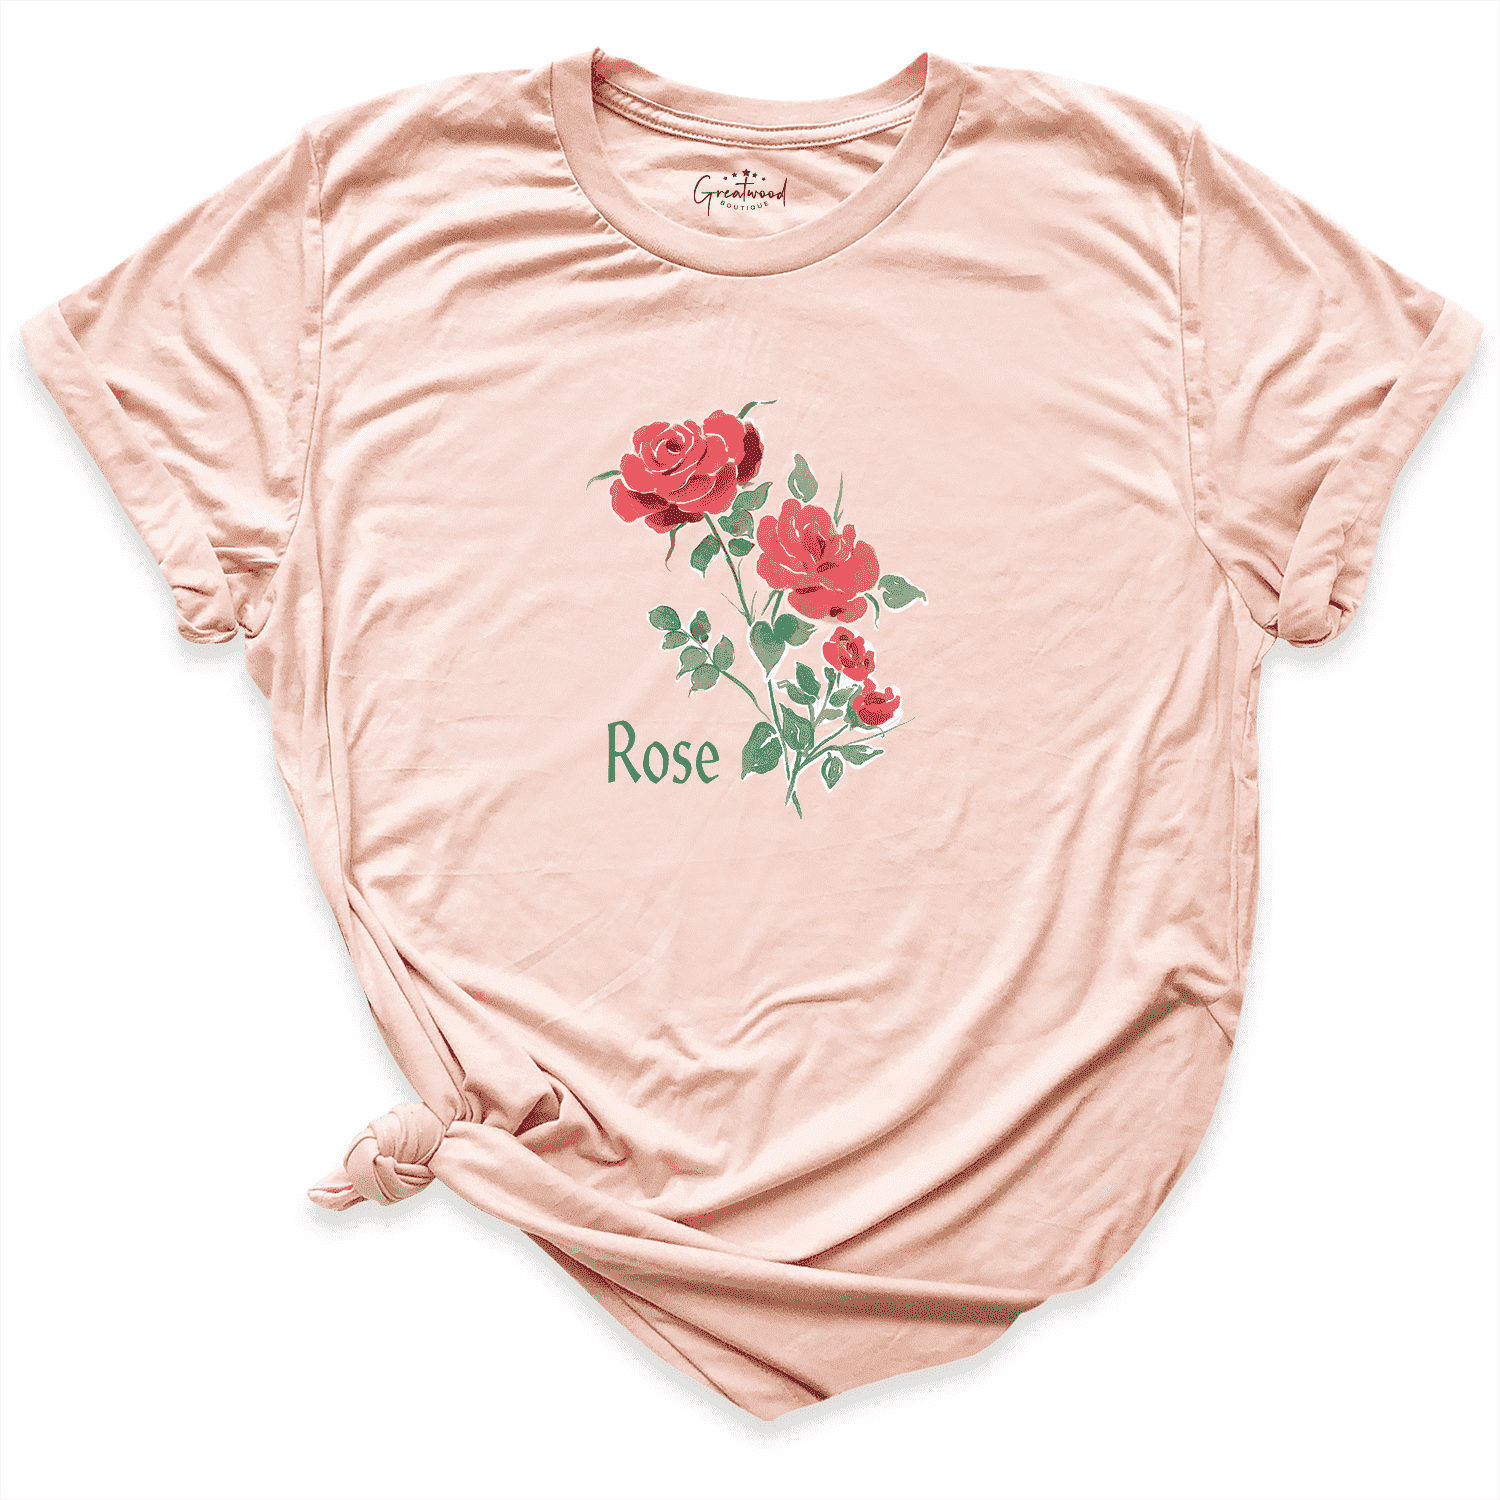 Rose Shirt Peach - Greatwood Boutique